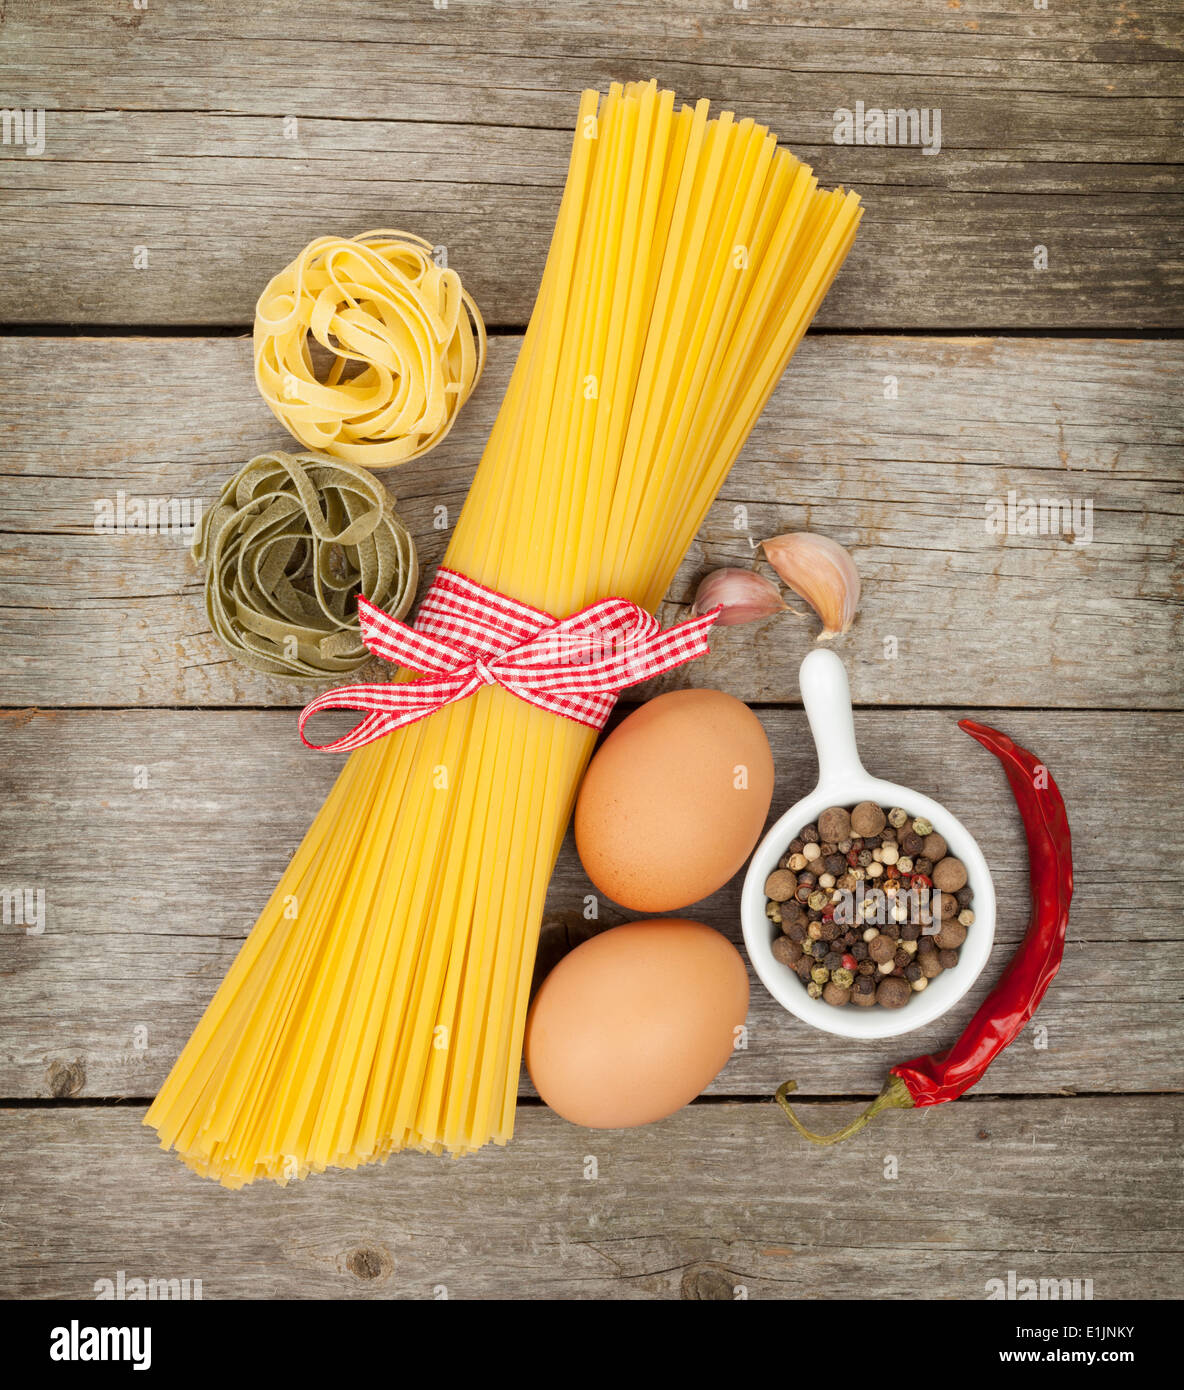 Pasta, eggs and spices on wooden table background Stock Photo